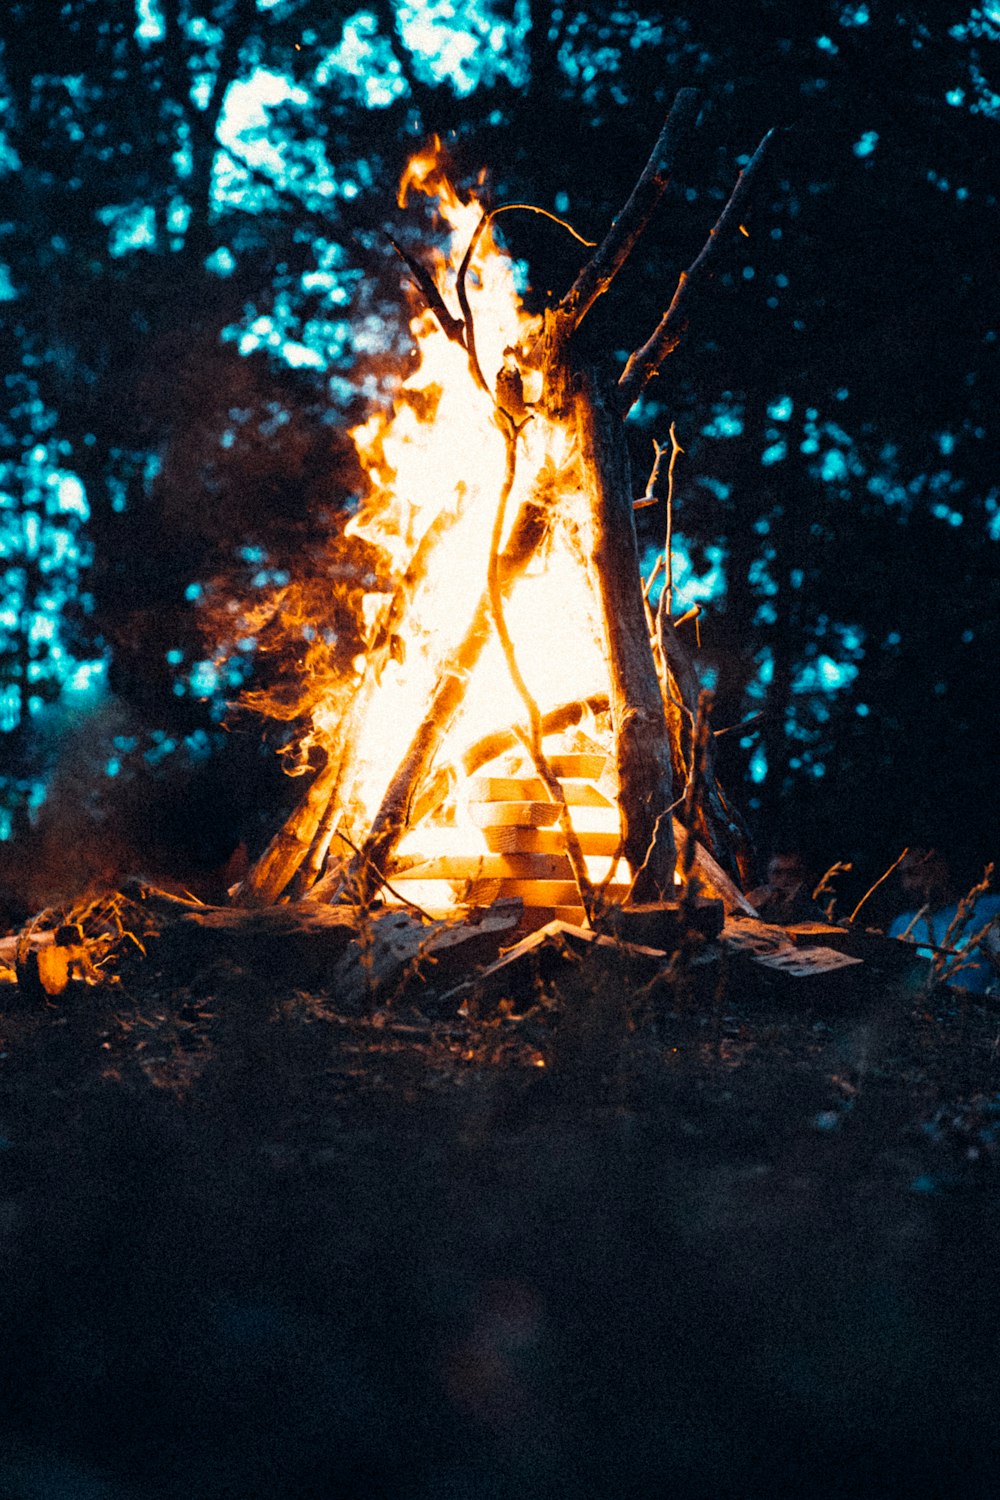 a campfire in the middle of a forest at night